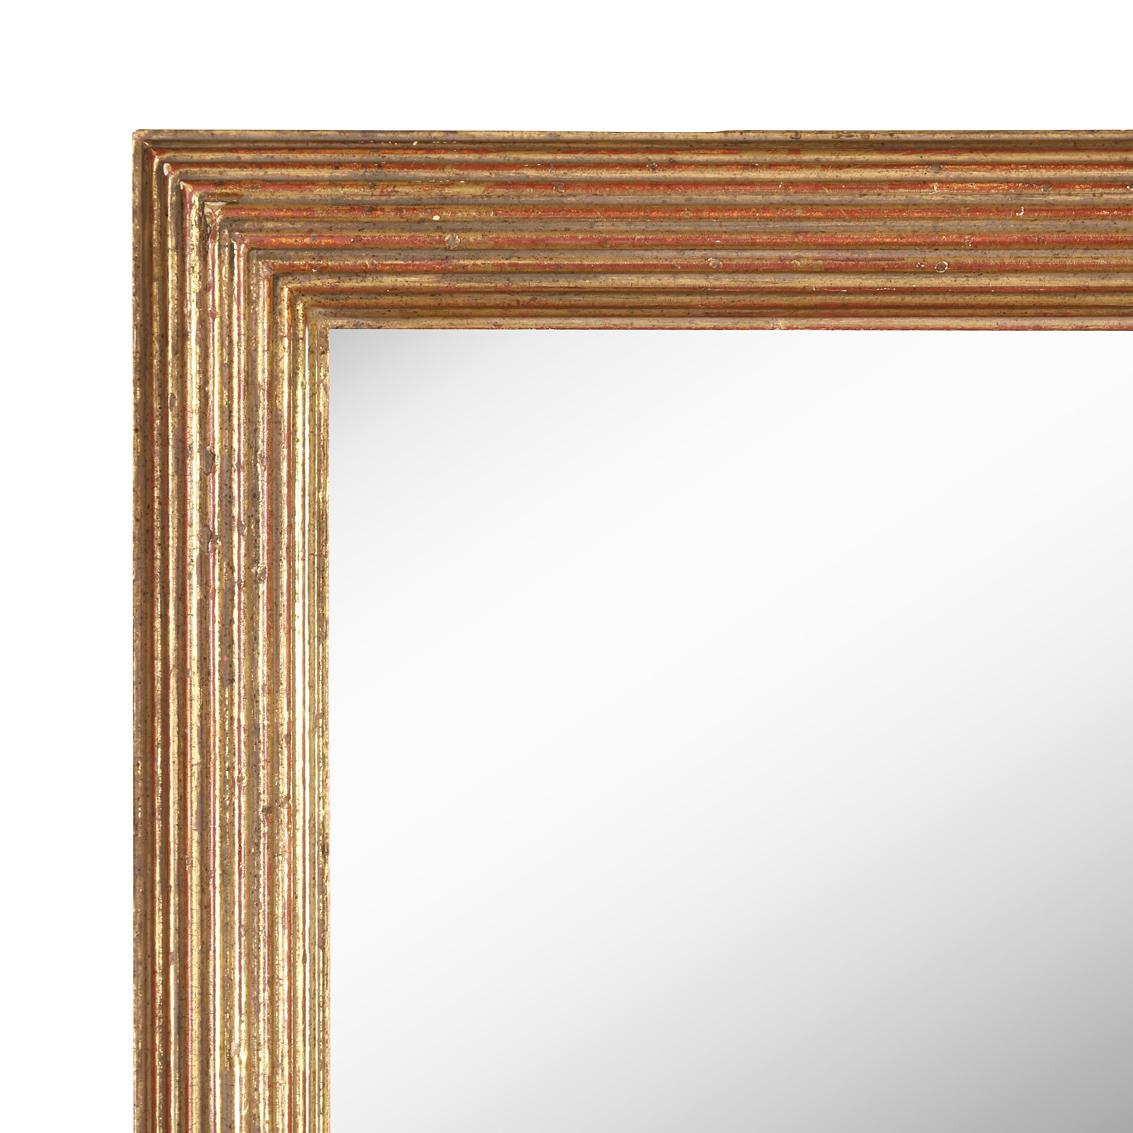 A reeded carved gilt rectangular wall mirror.  Natural patina to finish from wear and age add to the vintage beauty of the mirror with some chips and losses to the frame